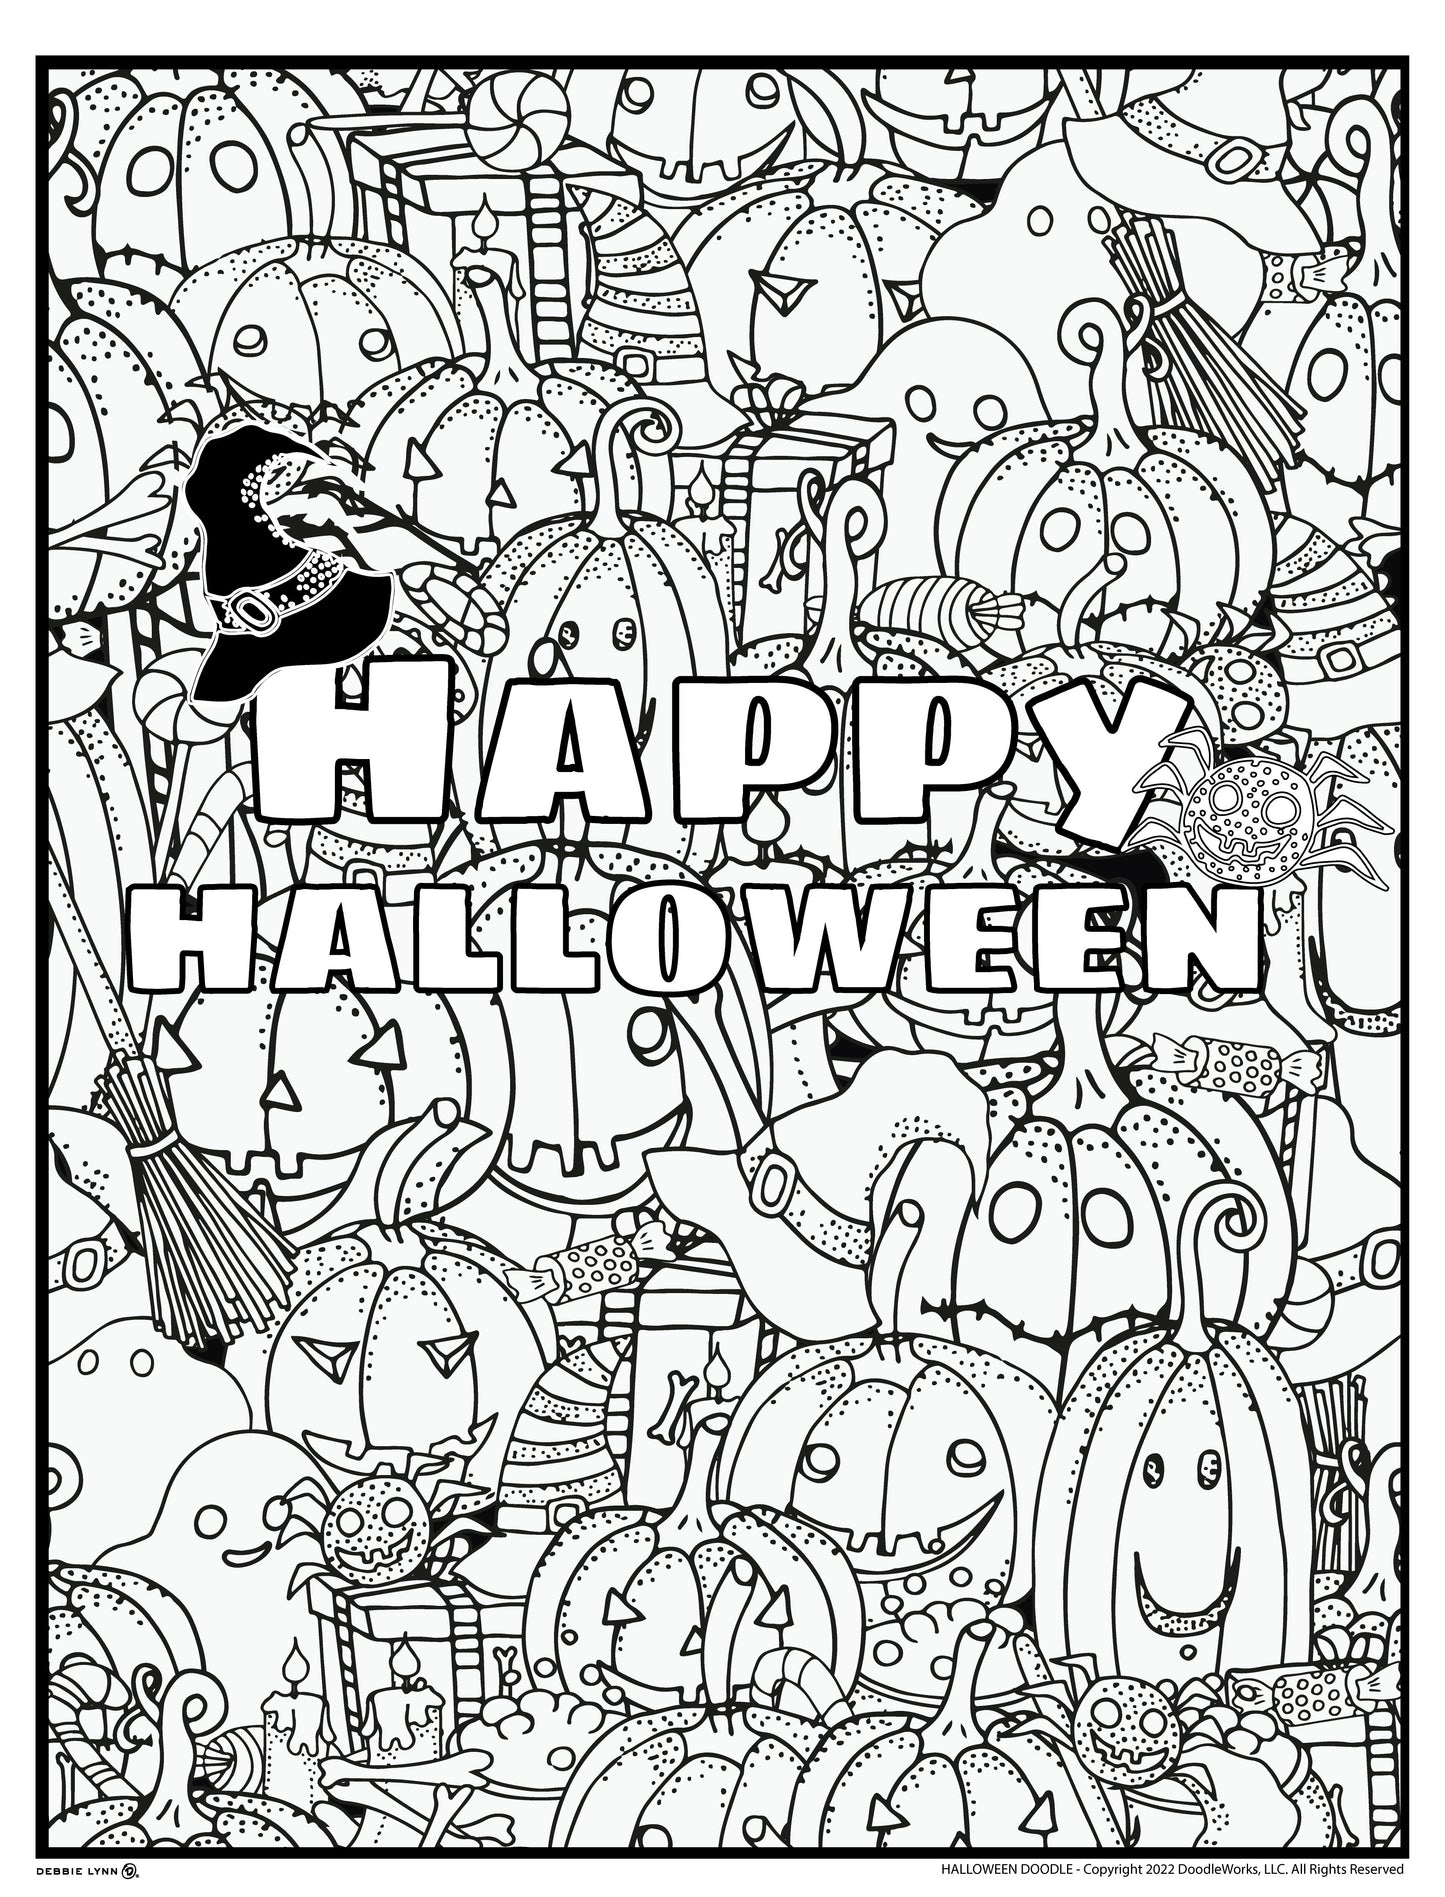 Halloween Doddle Personalized Giant Coloring Poster 46"x60"